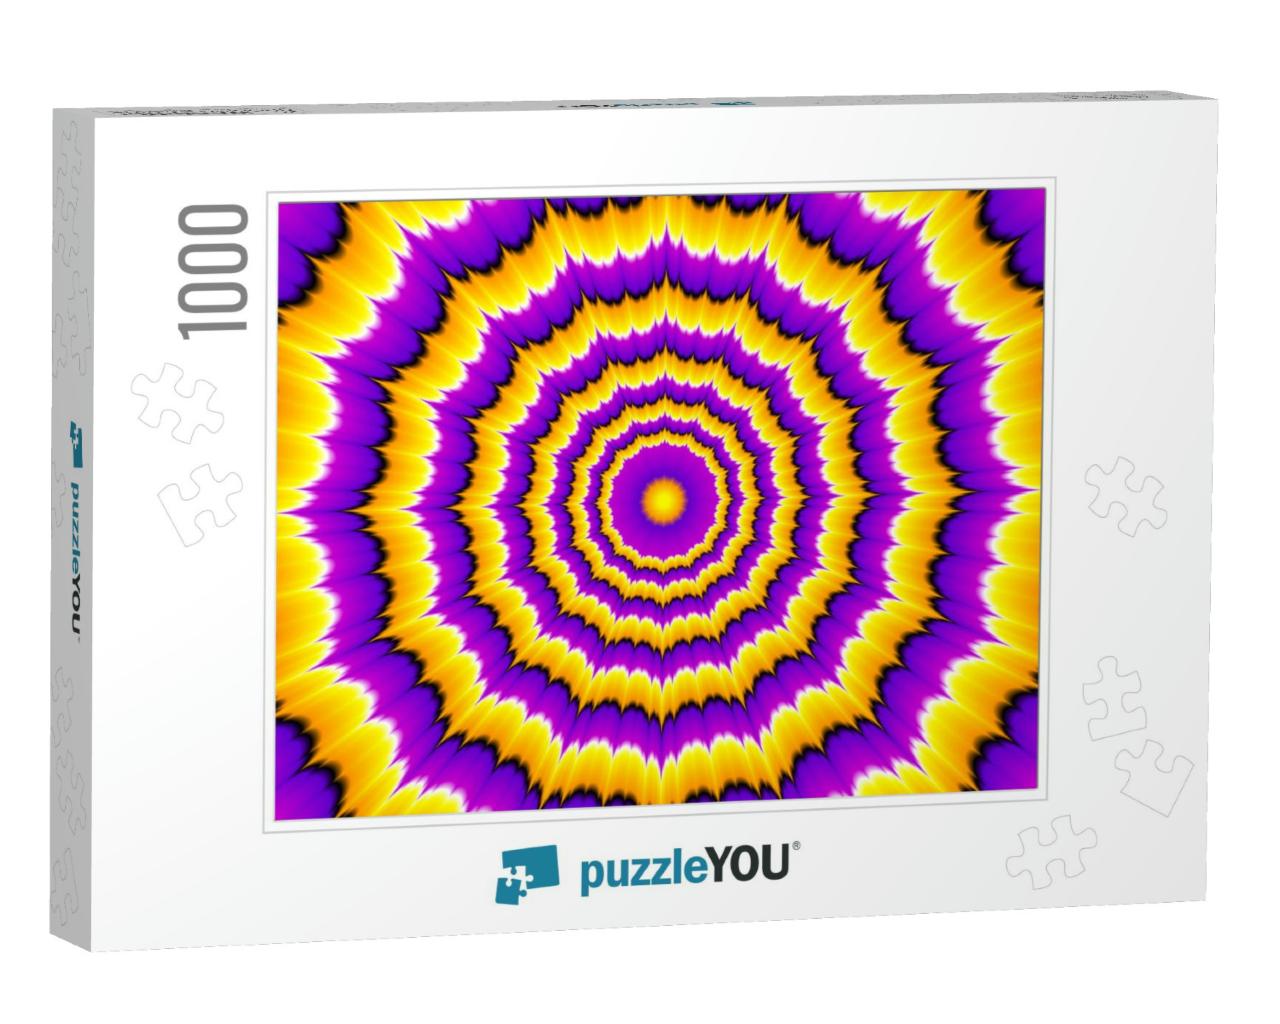 Yellow & Purple Flower Blossom. Optical Expansion Illusio... Jigsaw Puzzle with 1000 pieces